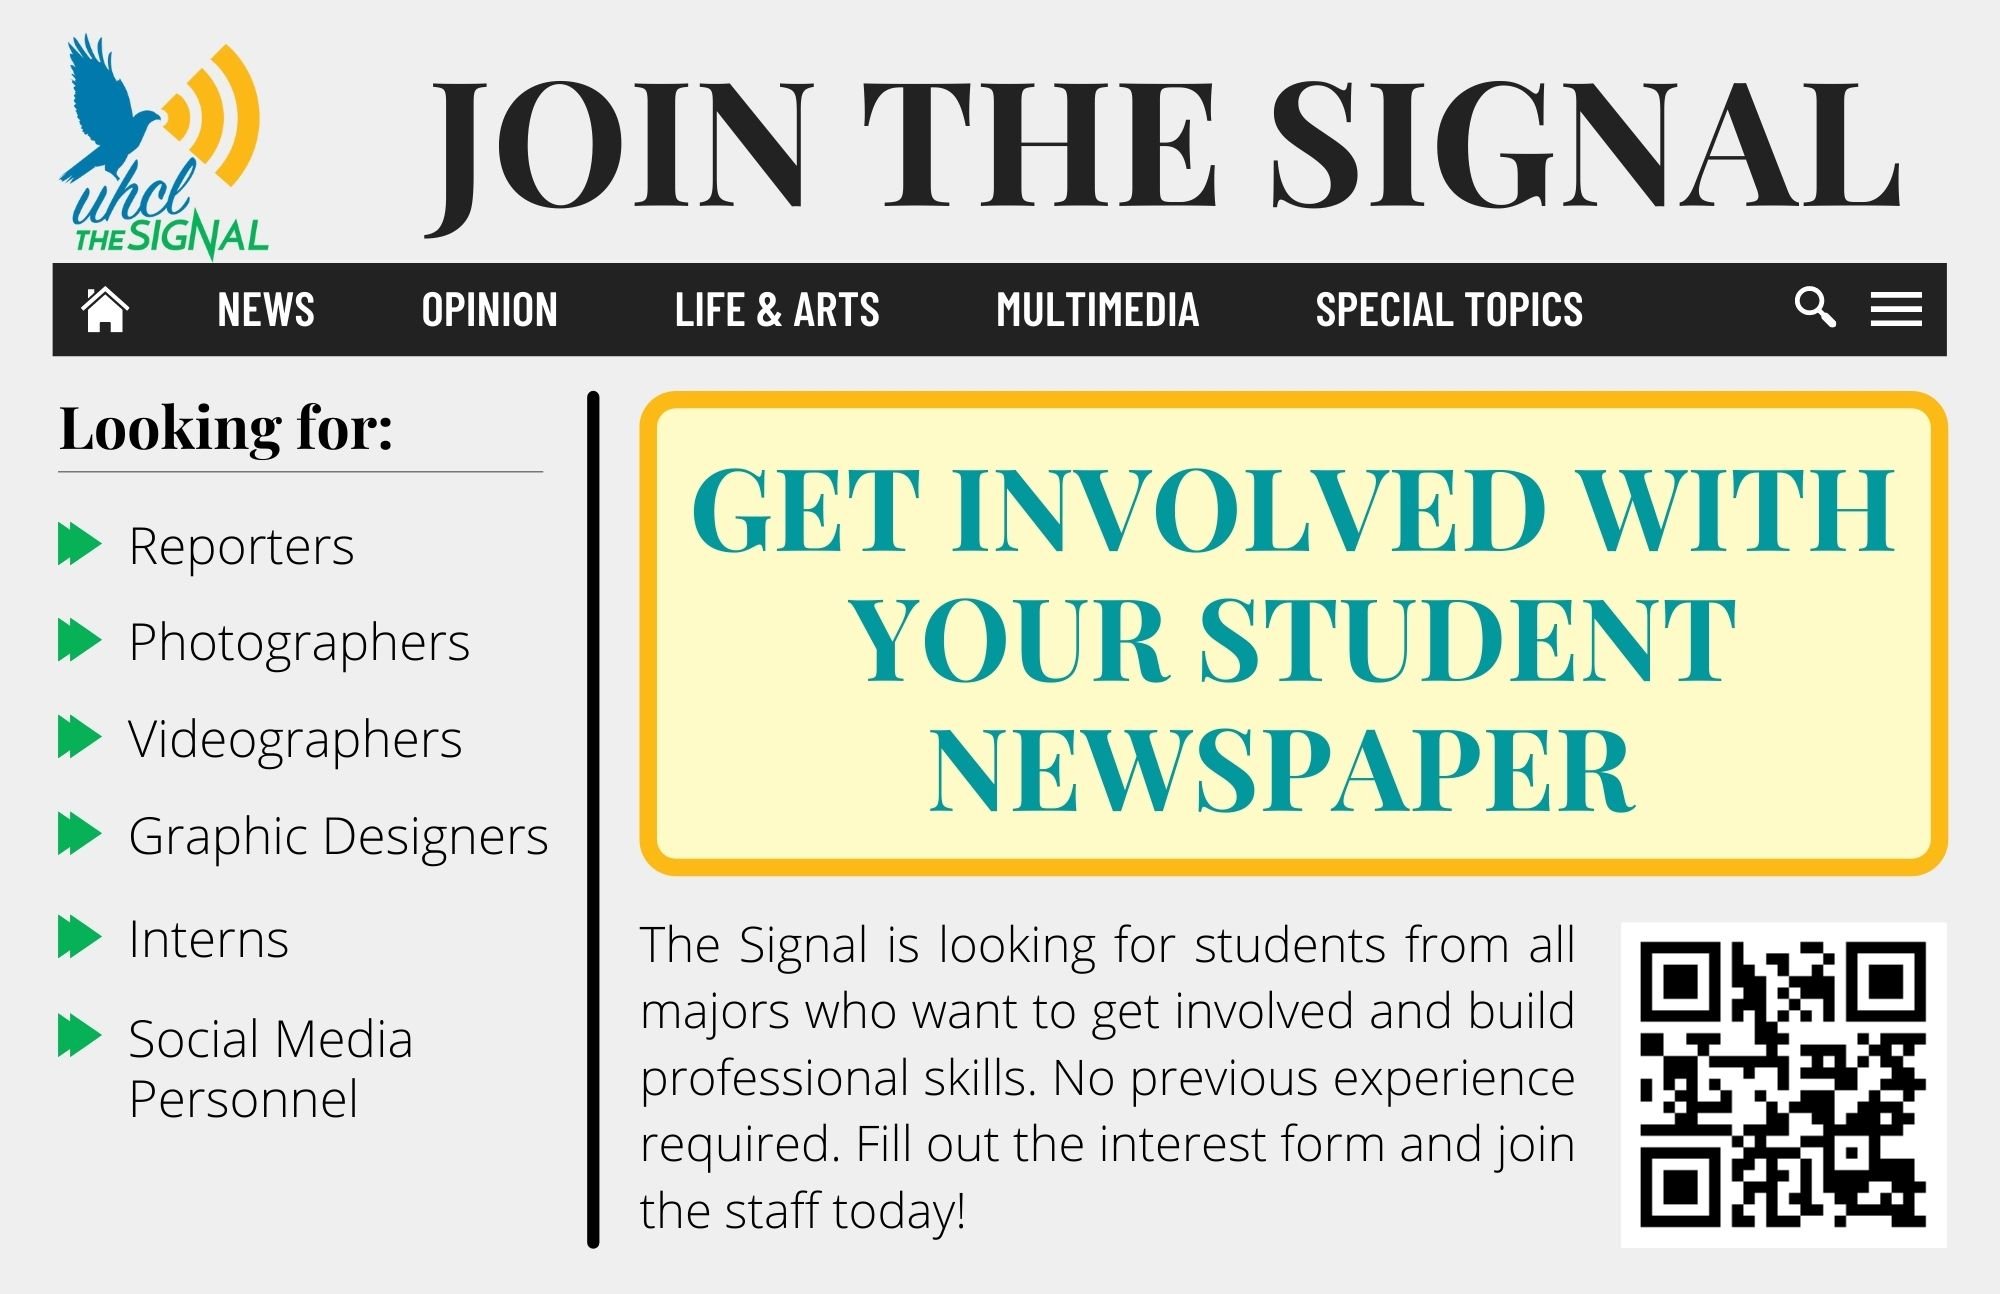 Ad: Join The Signal! Get involved with your student newspaper! The Signal is looking for students from all majors who want to get involved and build professional skills. No previous experience required. Fill out the interest form and join the staff today! Looking for: Reporters – Photographers – Videographers – Graphic Designers – Interns – Social Media Personnel. Fill out the interest form at https://docs.google.com/forms/d/e/1FAIpQLSeo0A8_8LrS4X5IGO6j6LEoXRTOamPHQjoy6MUOZPOkDpMoPw/viewform.